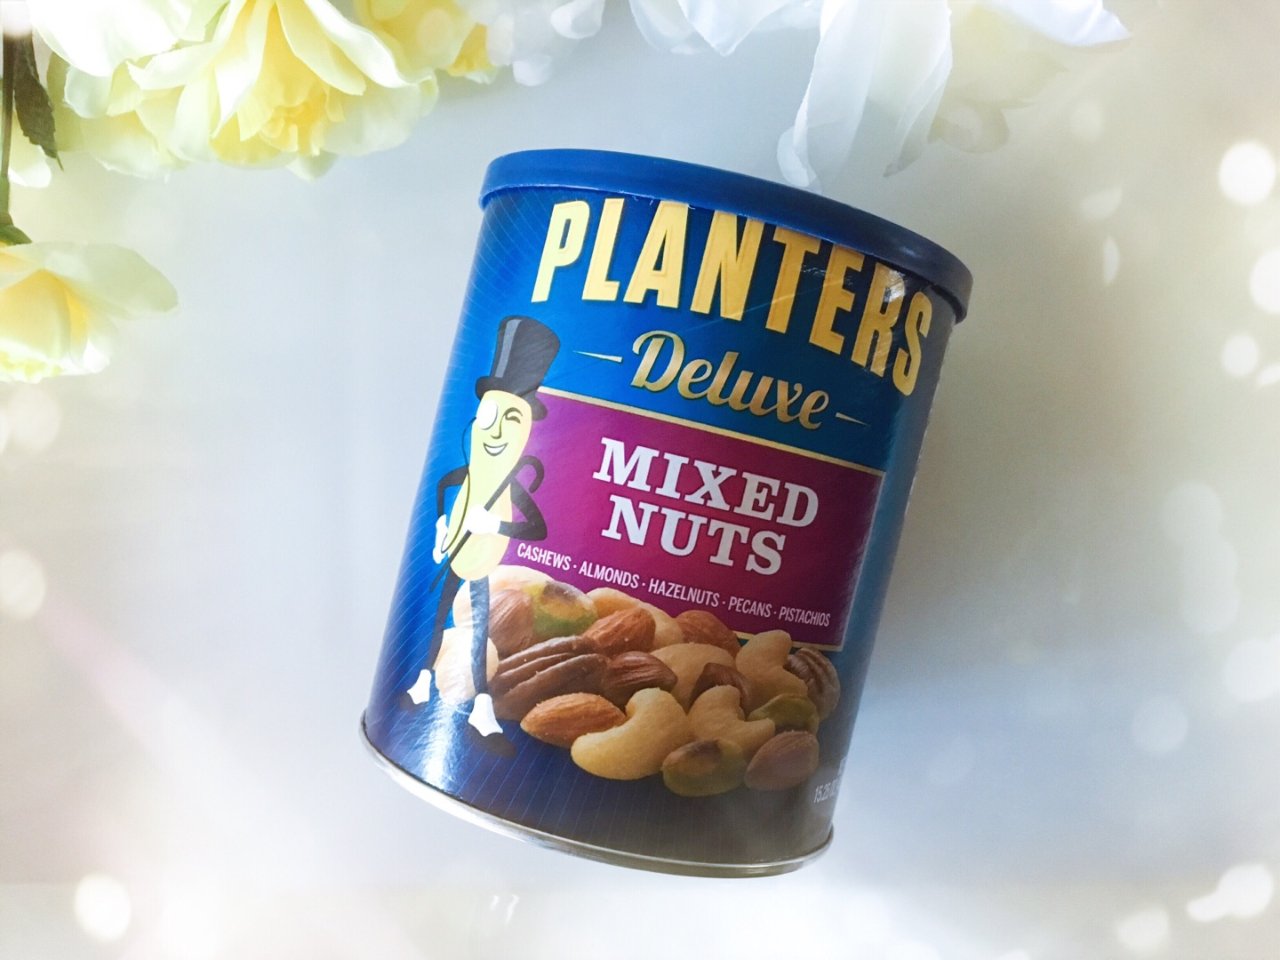 Planters 绅士,Deluxe Mixed Nuts,混合坚果